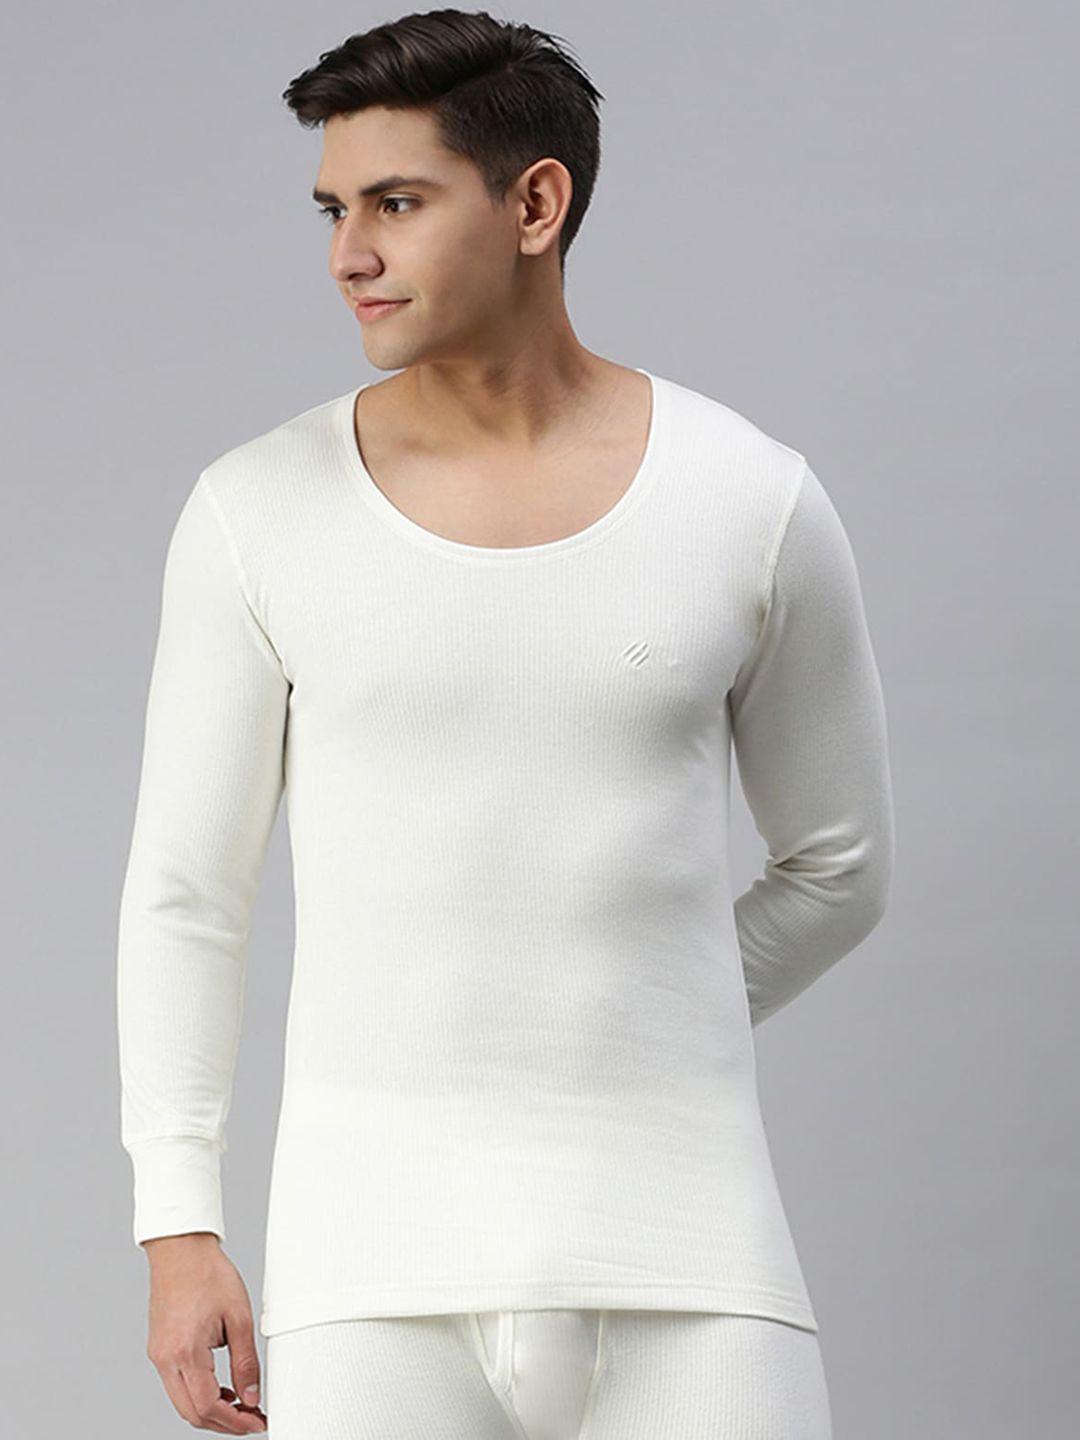 onn skinny fit round neck pure cotton thermal set